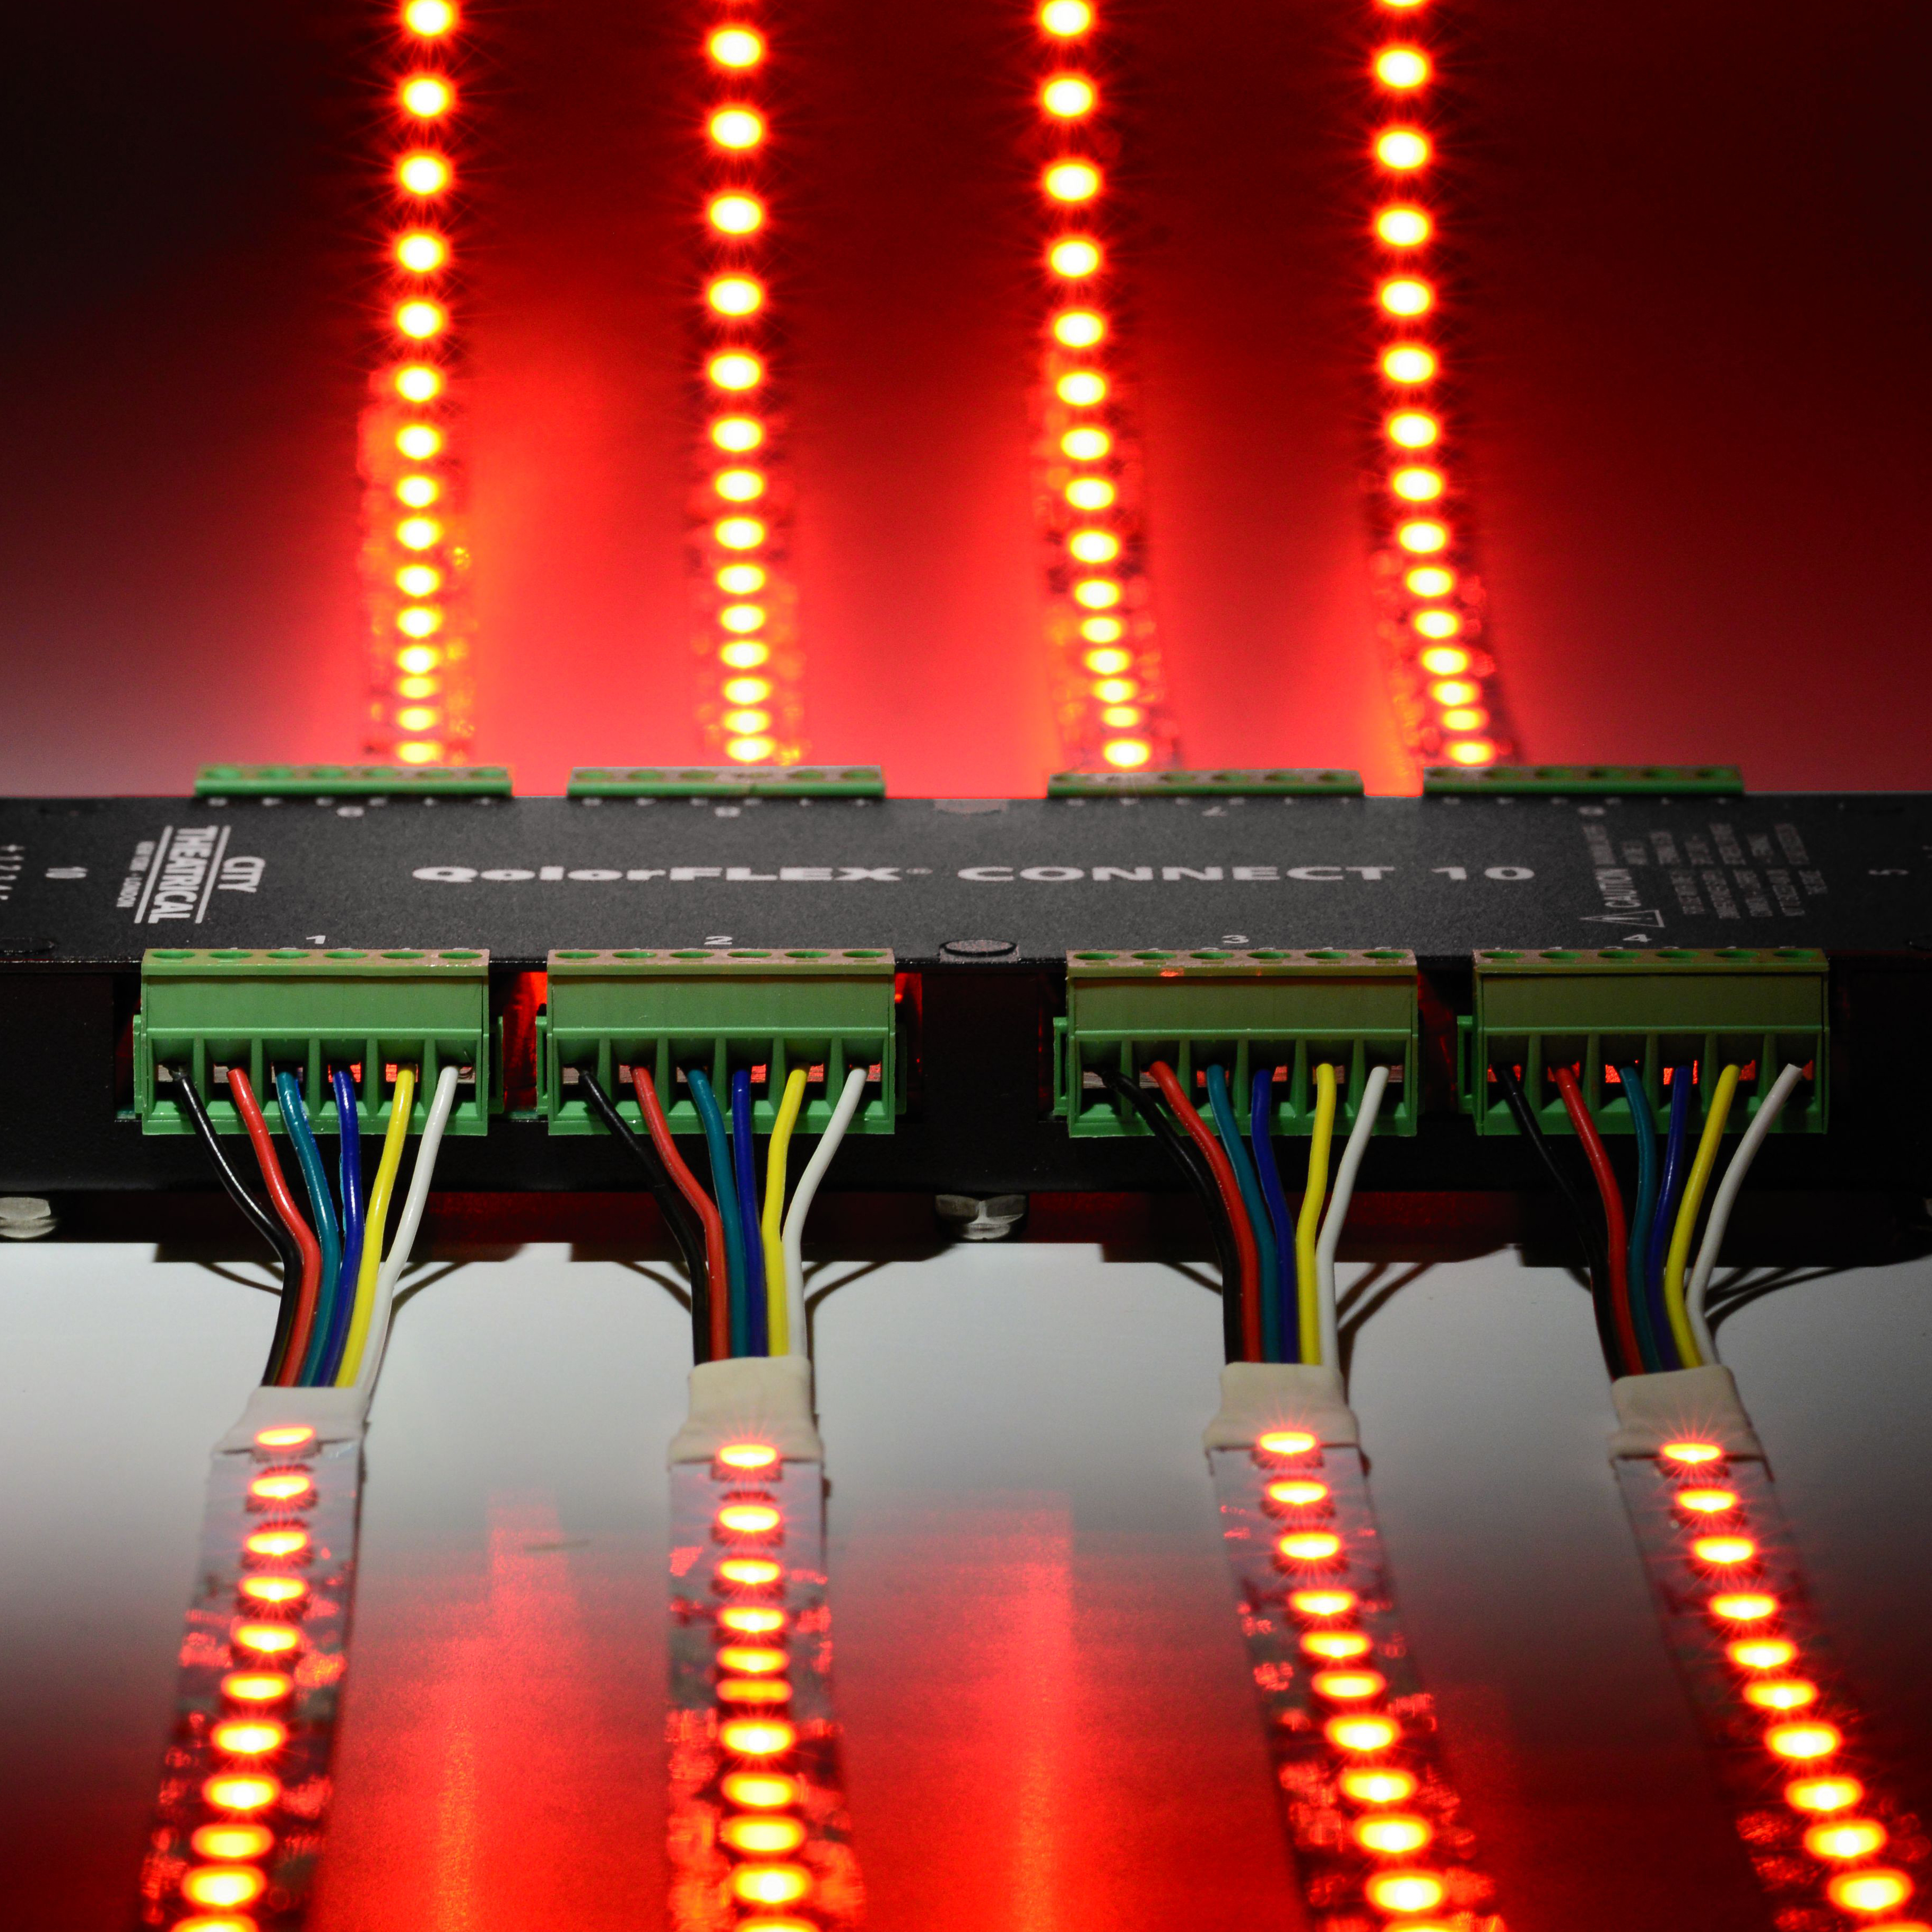 QolorFLEX Connect 10 - a central component in a full system of QolorFLEX LED Tape, Dimmers, and Accessories